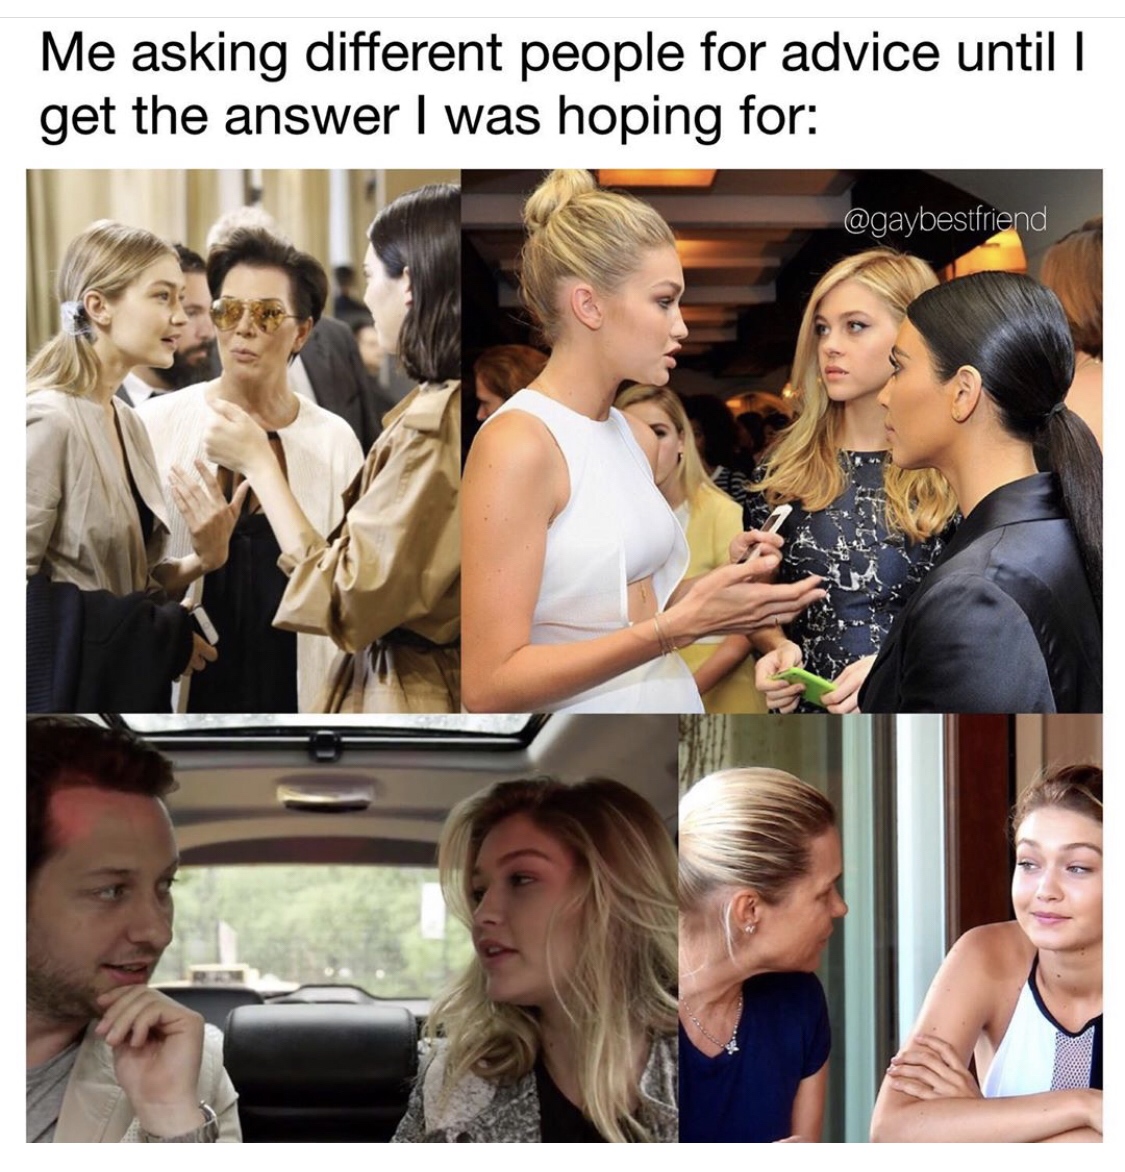 blond - Me asking different people for advice until I get the answer I was hoping for